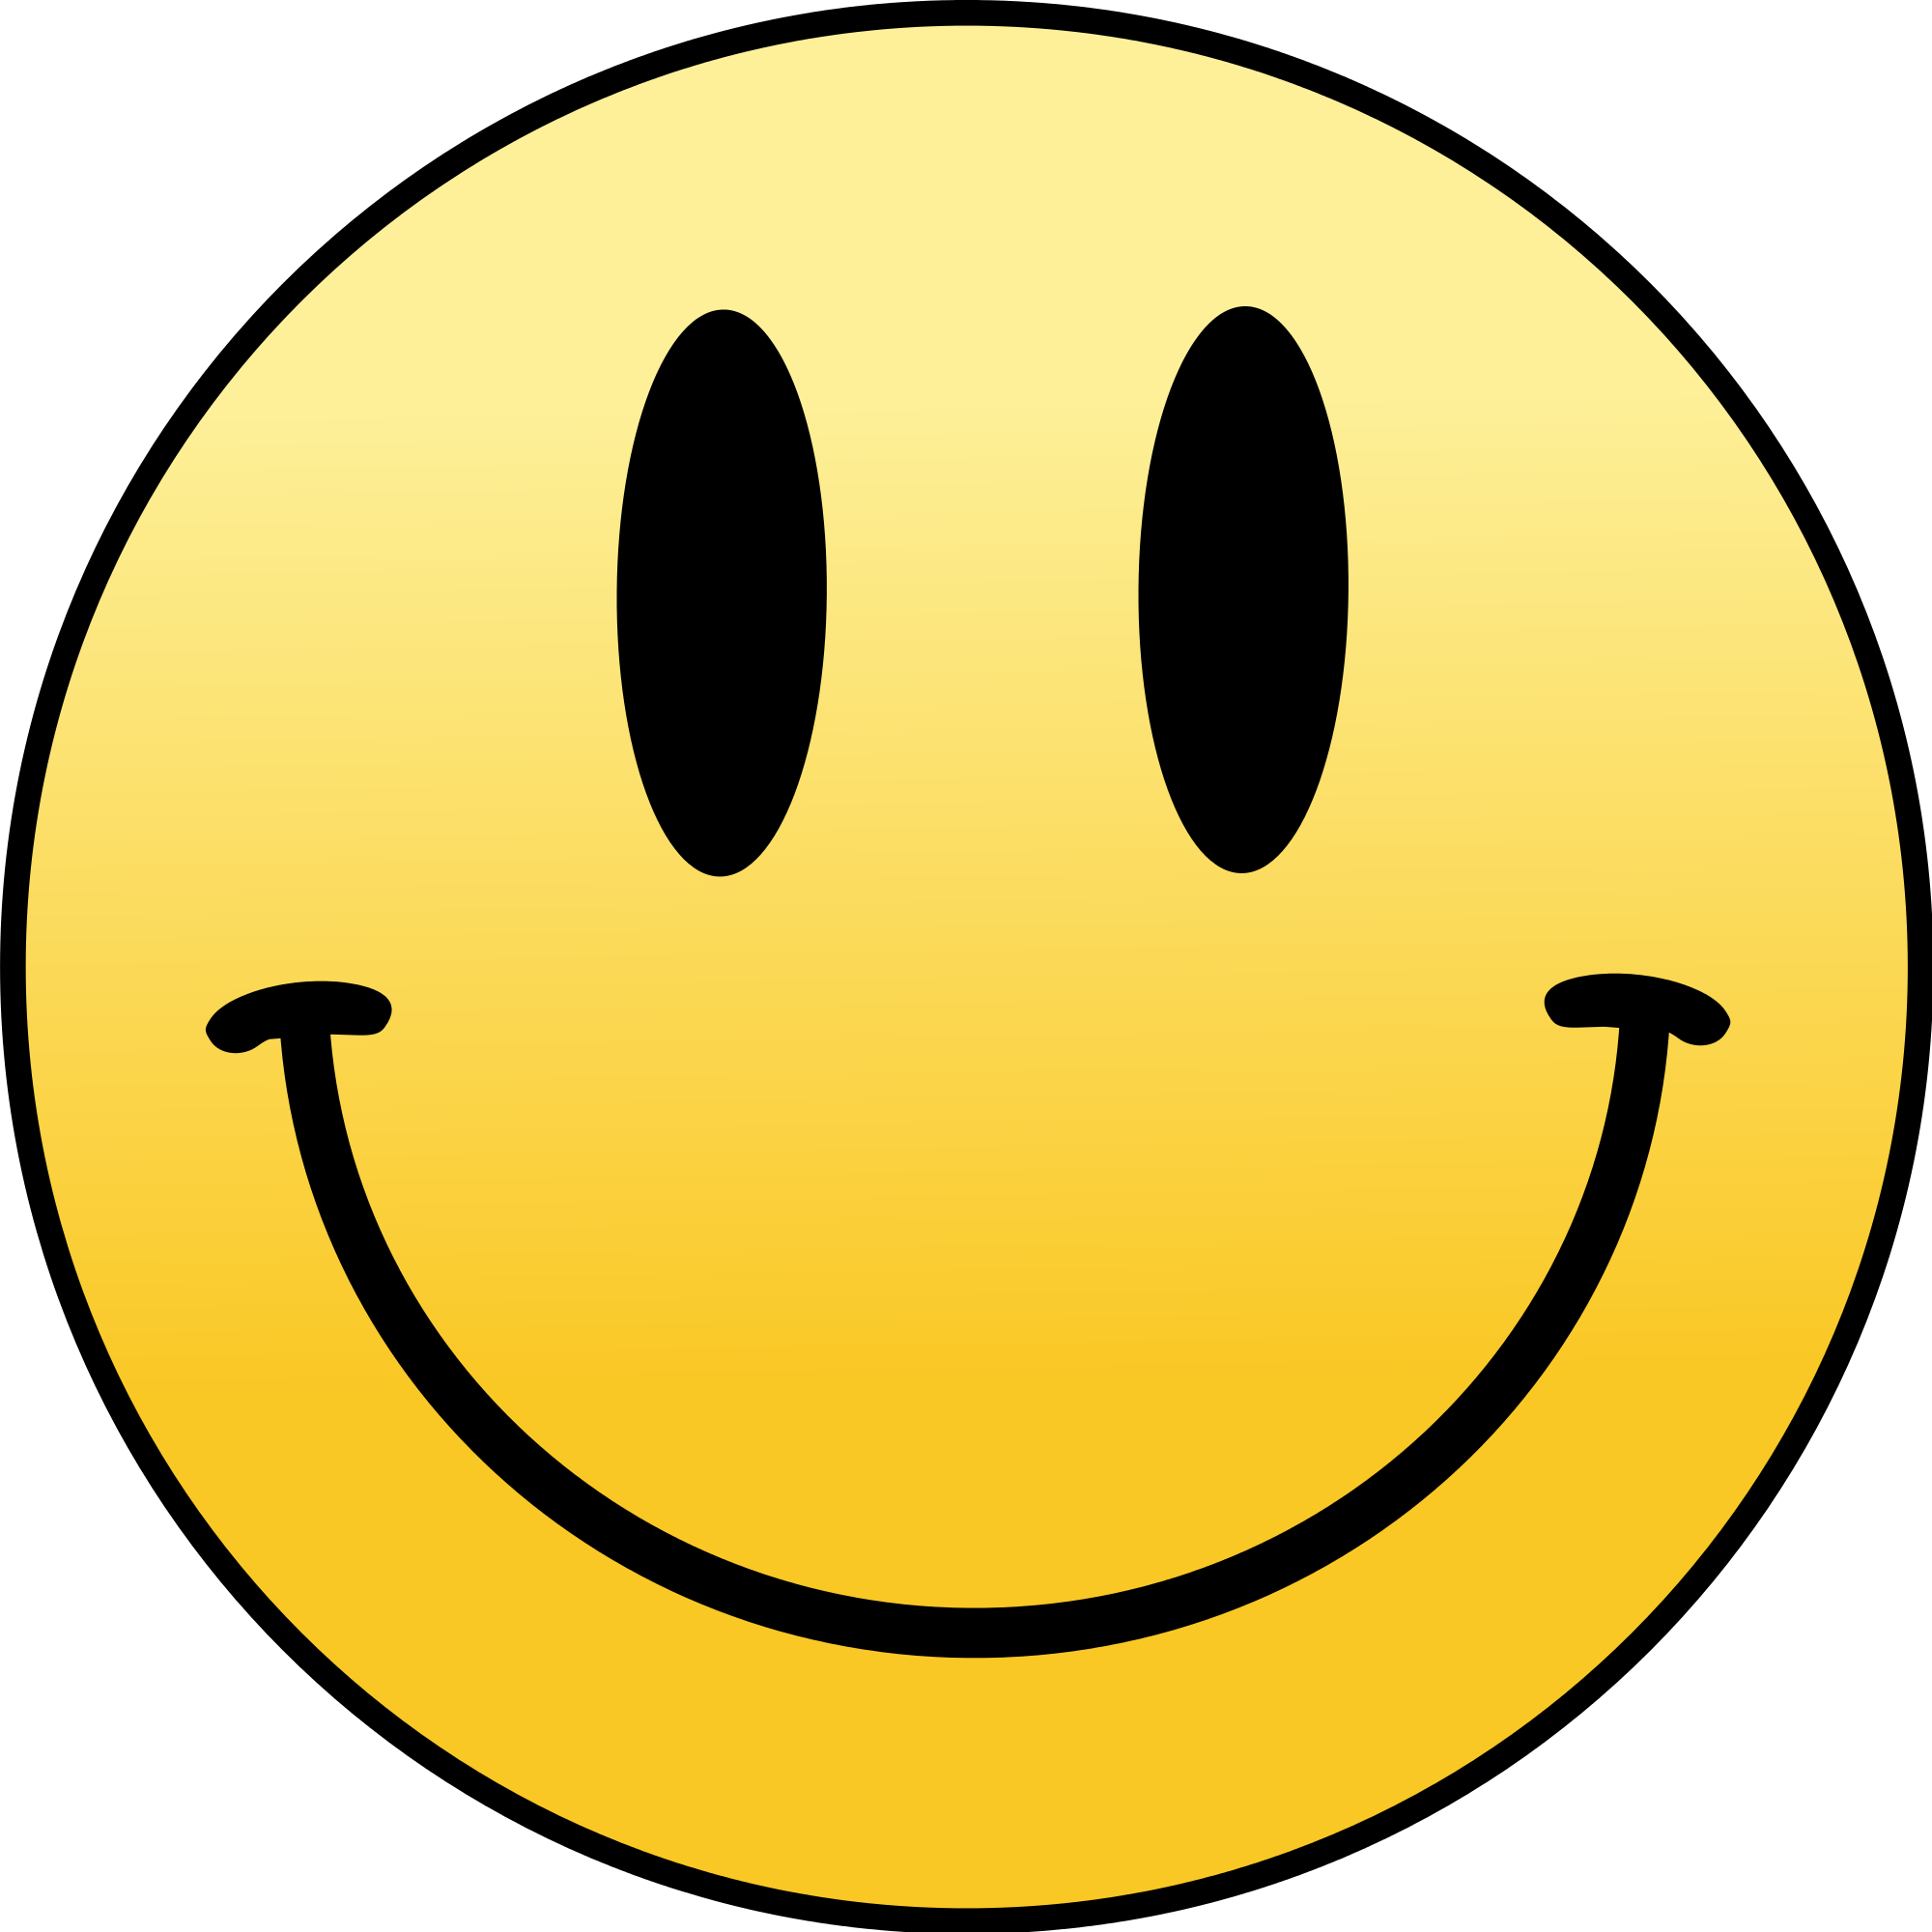 File:Mr. Smiley Face - Wikimedia Commons